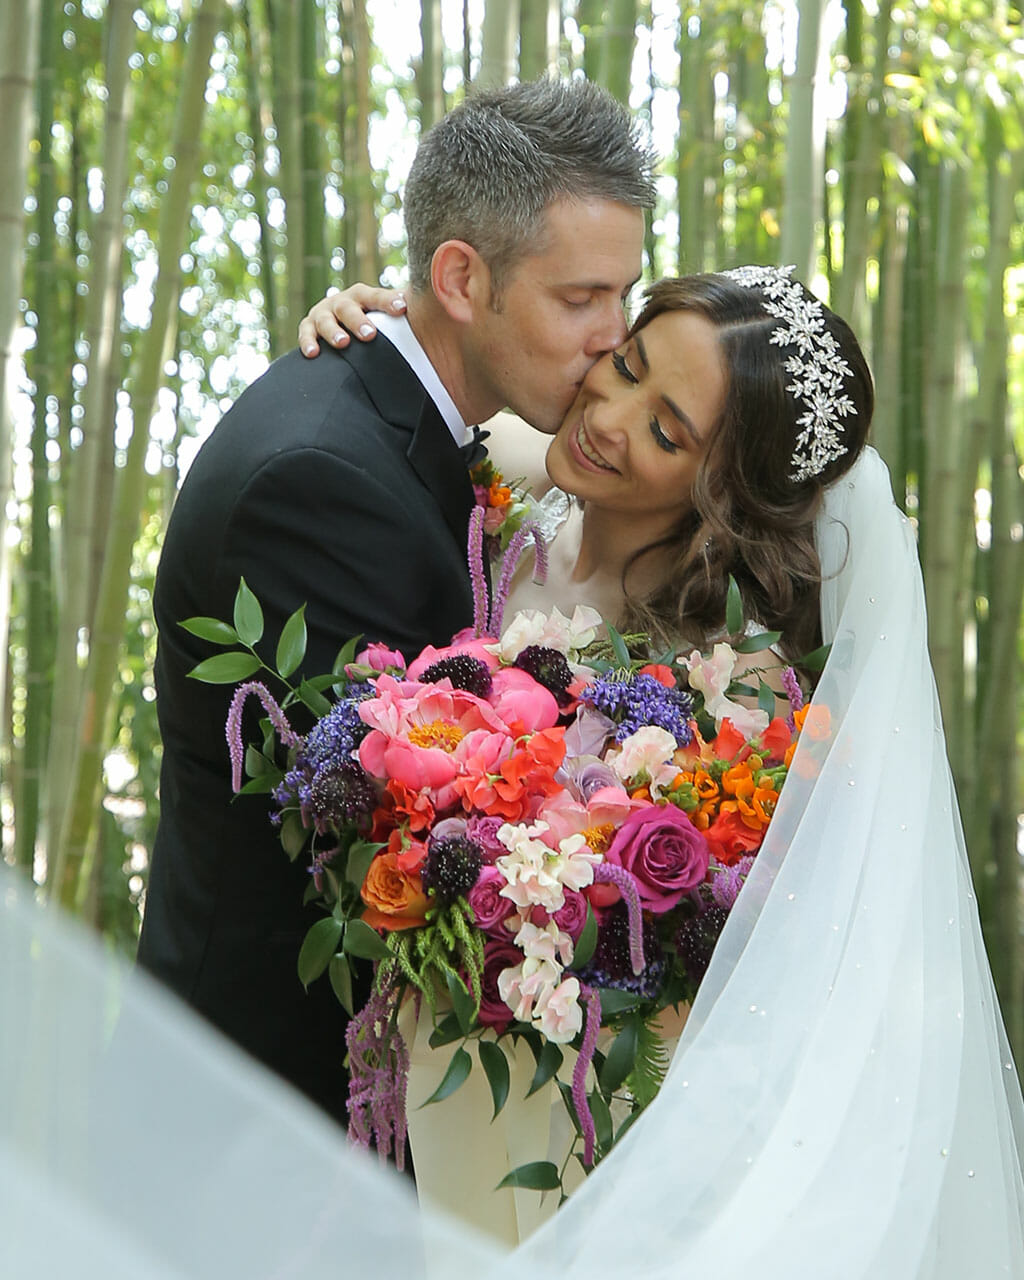 beautiful bride and groom kissing in the los angeles armboretum and holding bouquet of orange white and pink flowers